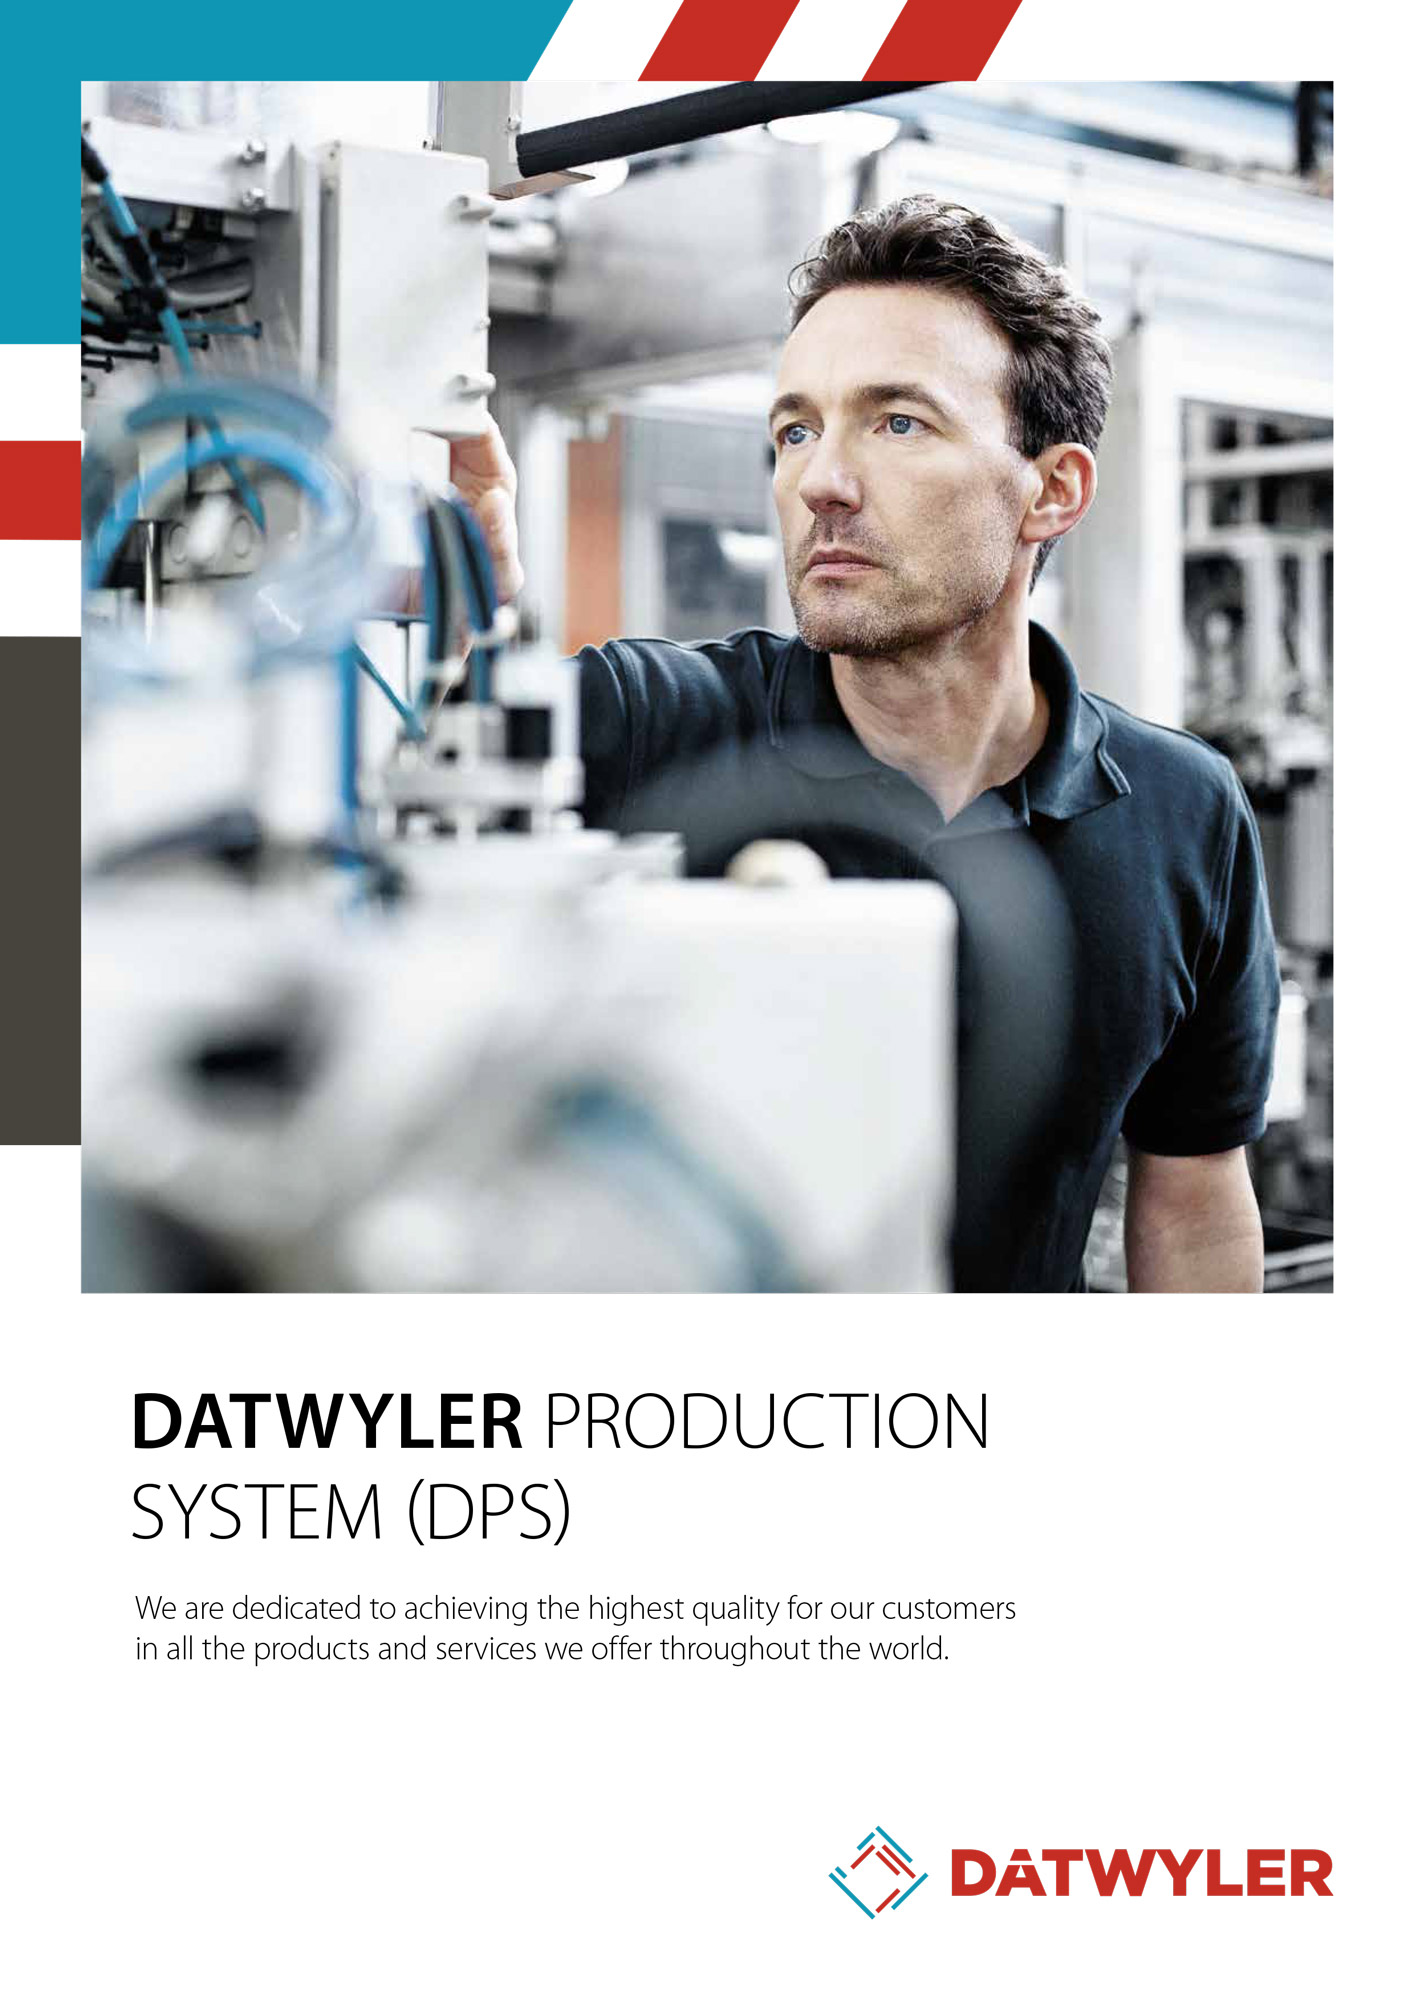 Datwyler Production System